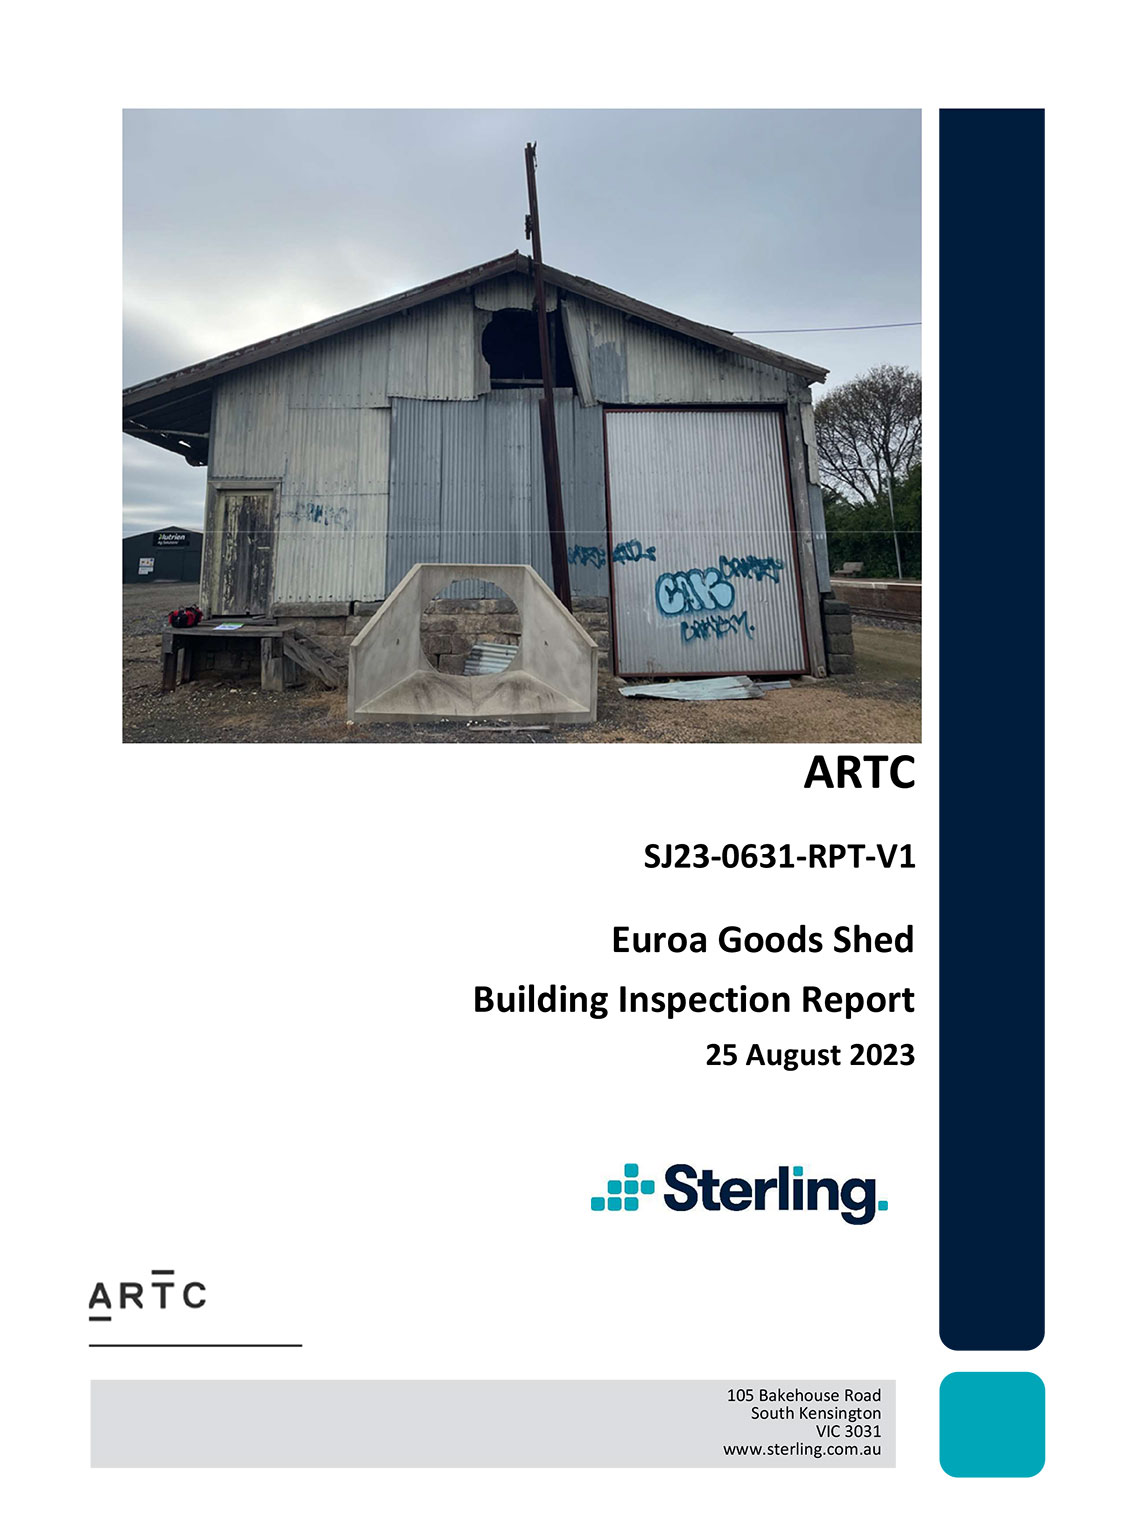 Image thumbnail for Euroa Goods Shed Building Inspection Report